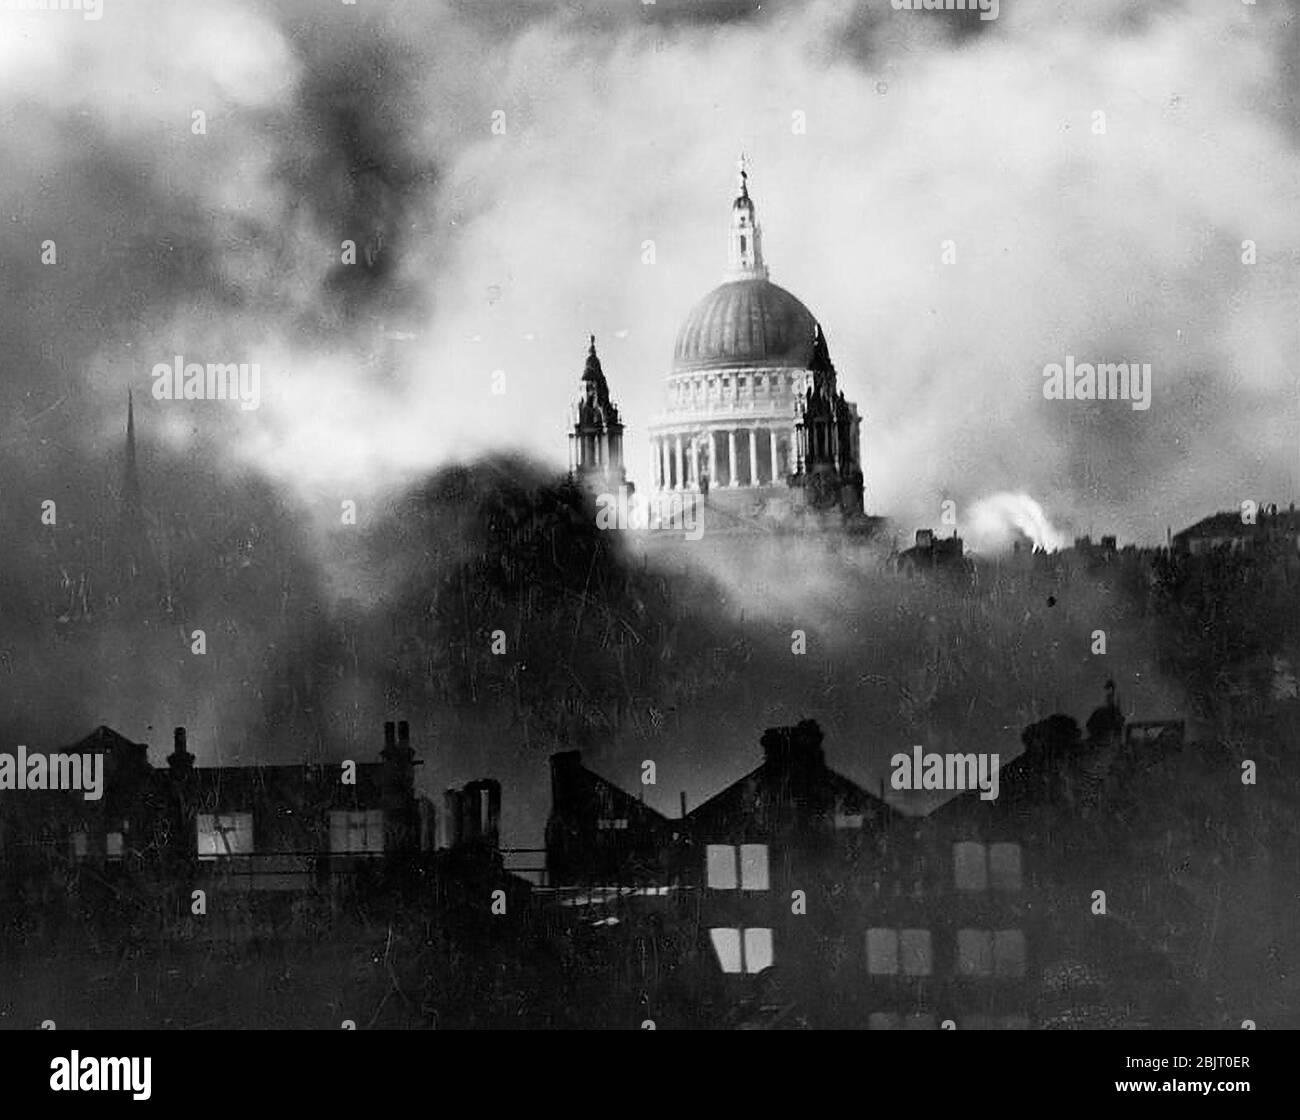 Air Raid Damage in Britain during the Second World War St Paul's Cathedral, rising above the bombed London skyline, is shrouded in smoke during the Blitz. The photograph was taken from the roof of the Daily Mail offices in Fleet Street. Stock Photo